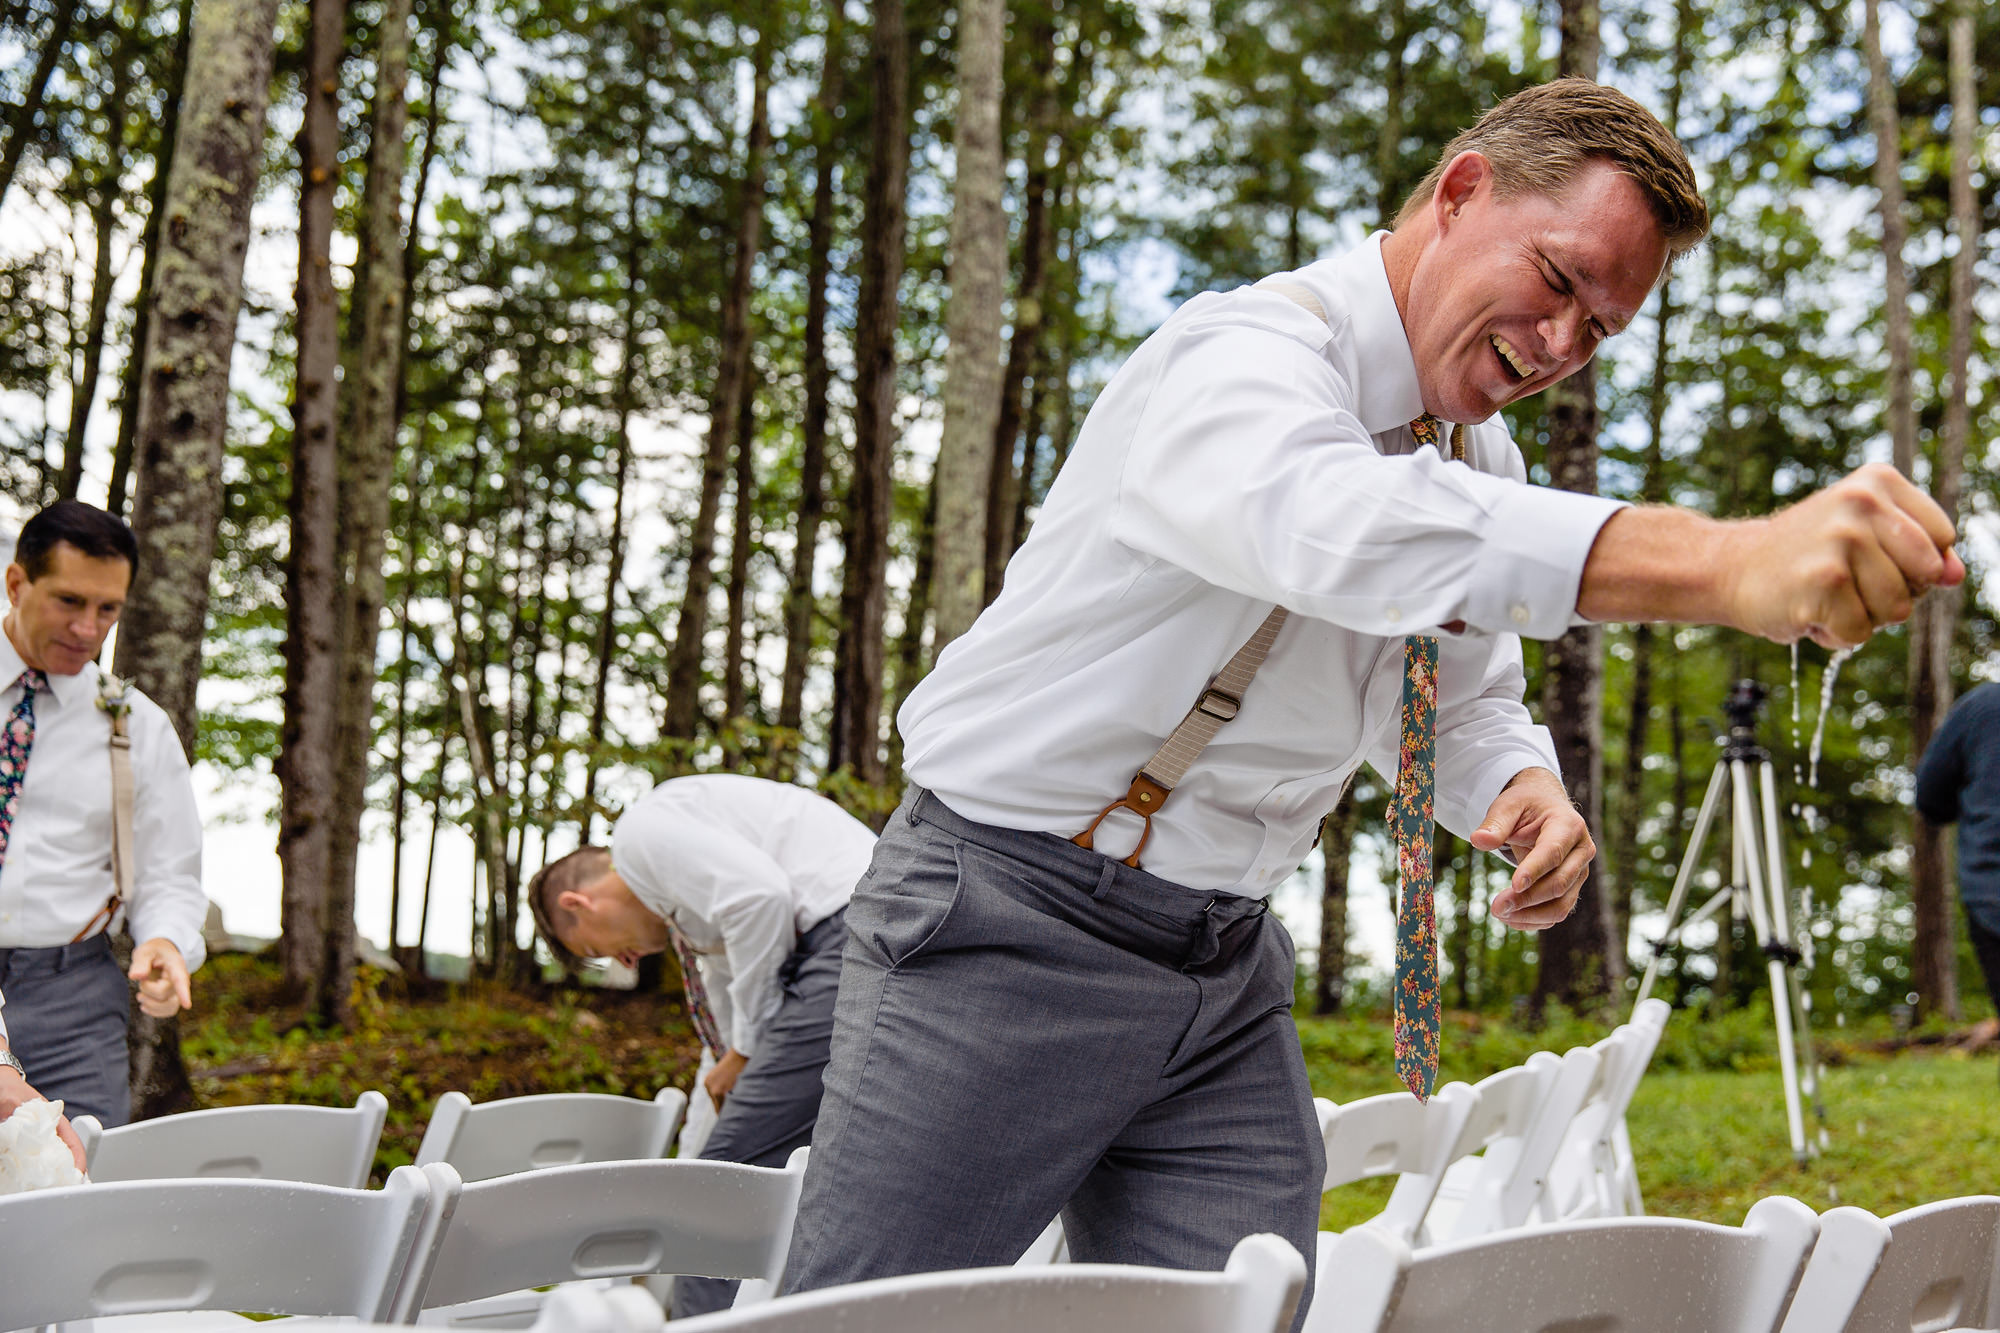 Groomsmen wipe down the ceremony chairs with paper towels after a rainstorm soaks them at a Maine wedding